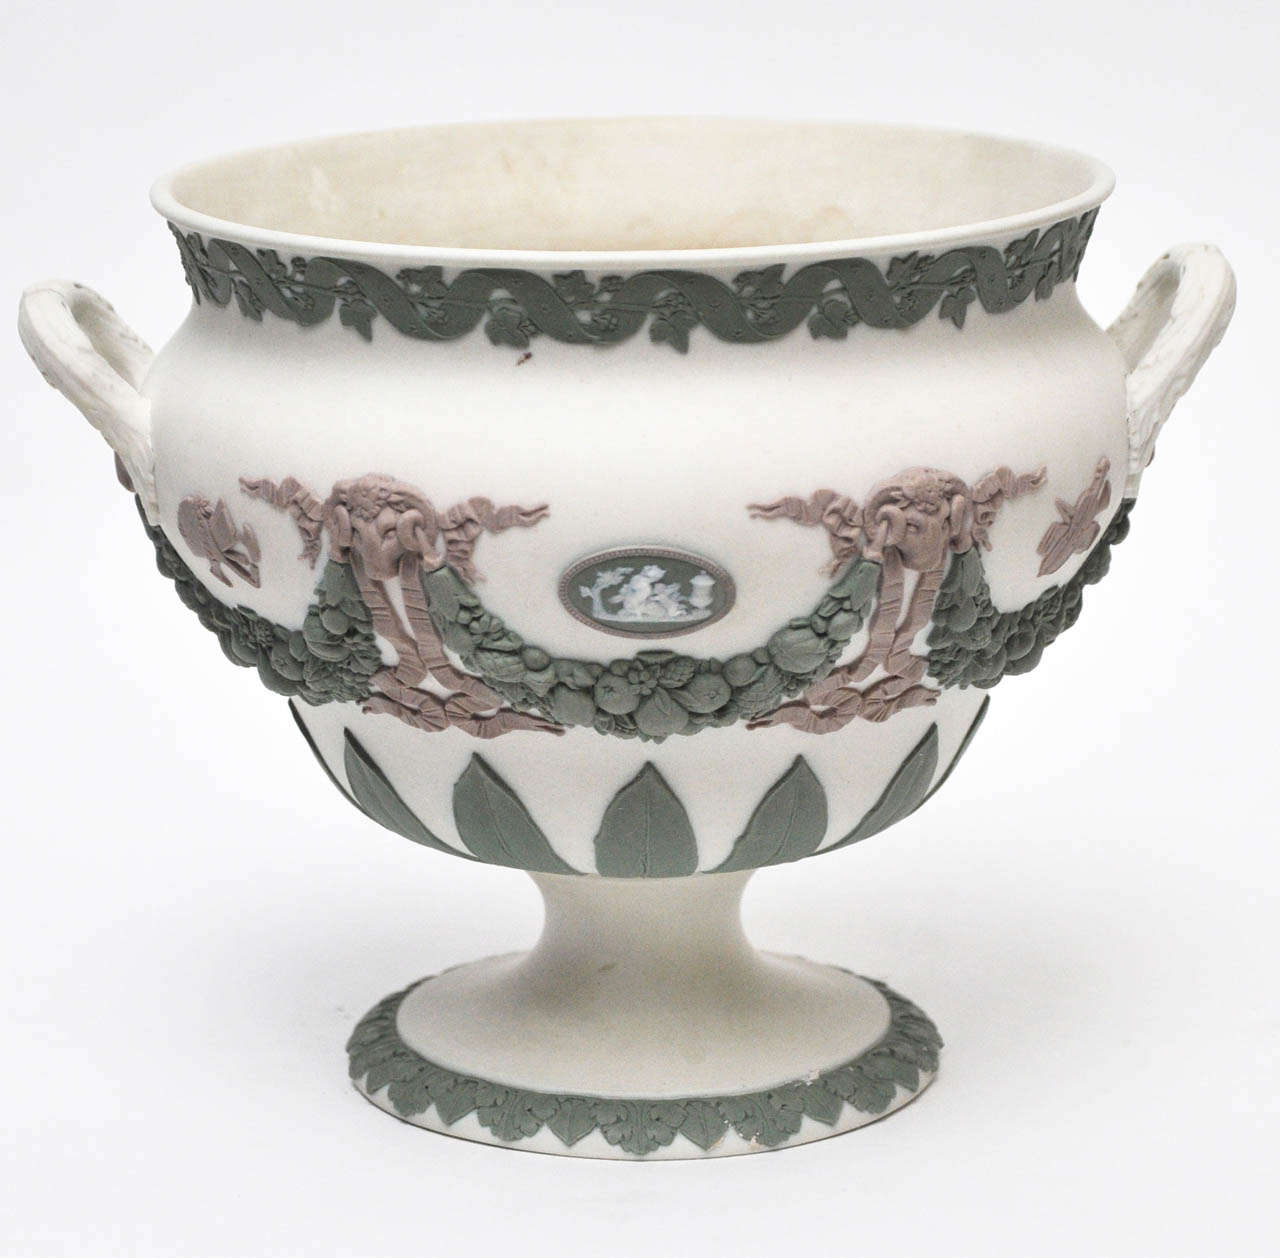 Rare, tri-colored Wedgwood jasperware urn with raised green and lavender detail on white background. Green floral ribbon design encircles the mouth, center and base of urn. The center green floral wreath is accentuated by raised lavender ram heads